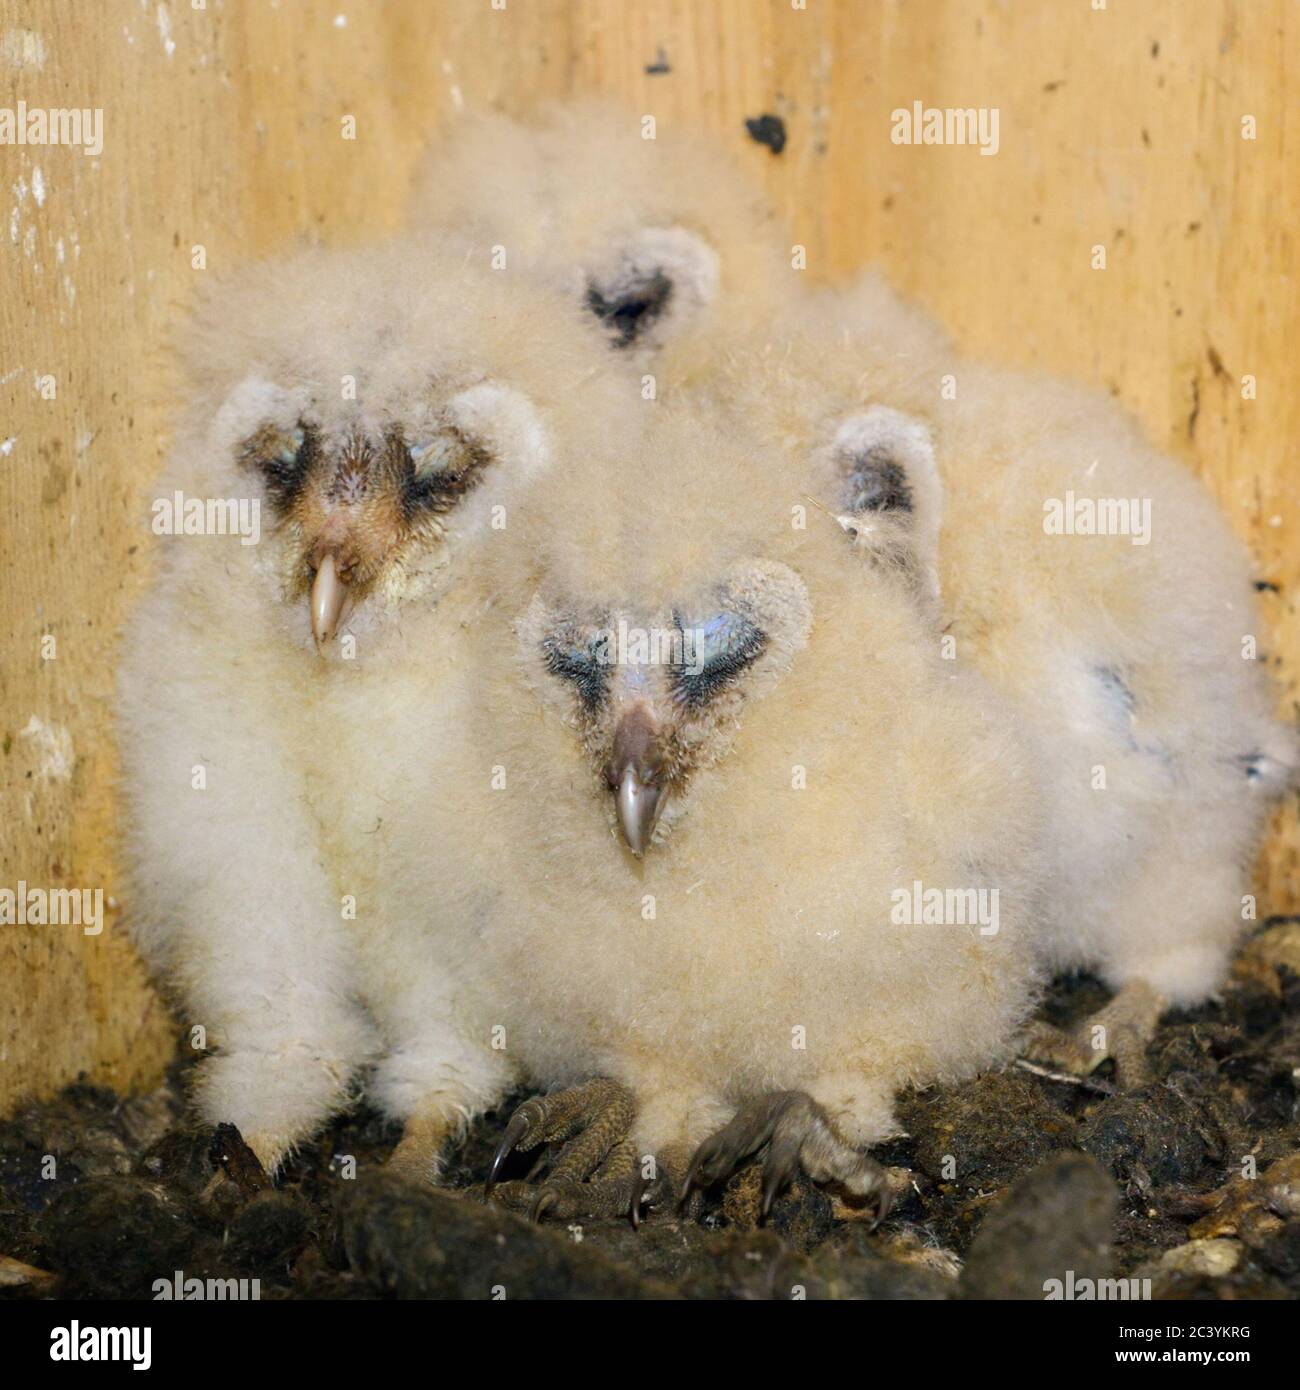 Barn Owl ( Tyto alba ), chicks, offspring, crouched, sitting in their nesting aid, sleeping, cute and funny animal babies, wildlife, Europe. Stock Photo